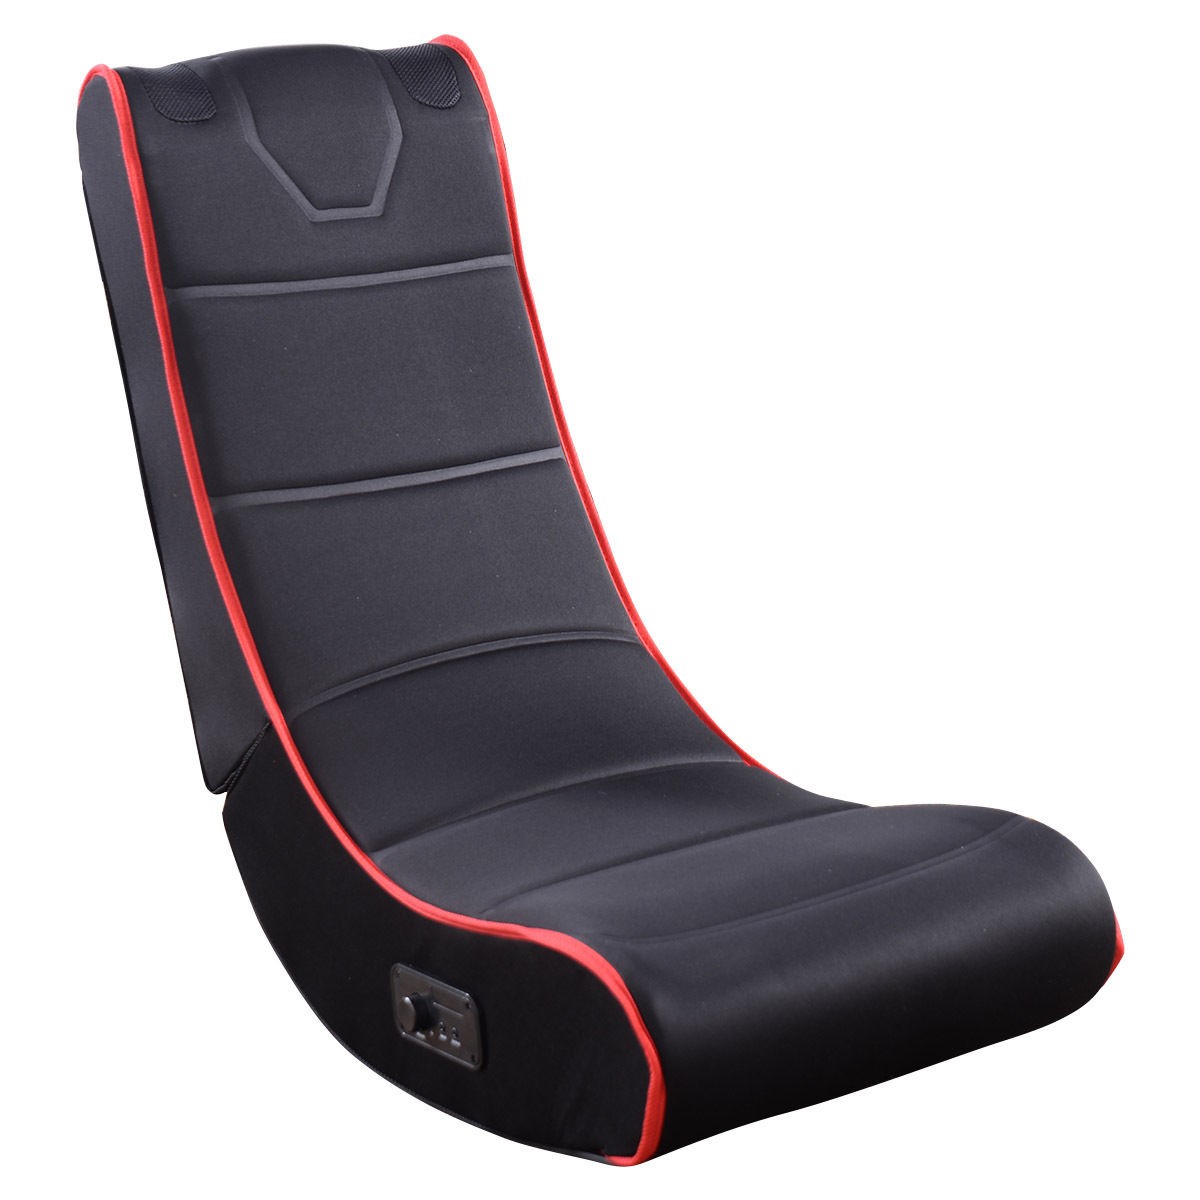 Ergonomic Folding Chair Gaming Seat with Wireless Built-in Speakers